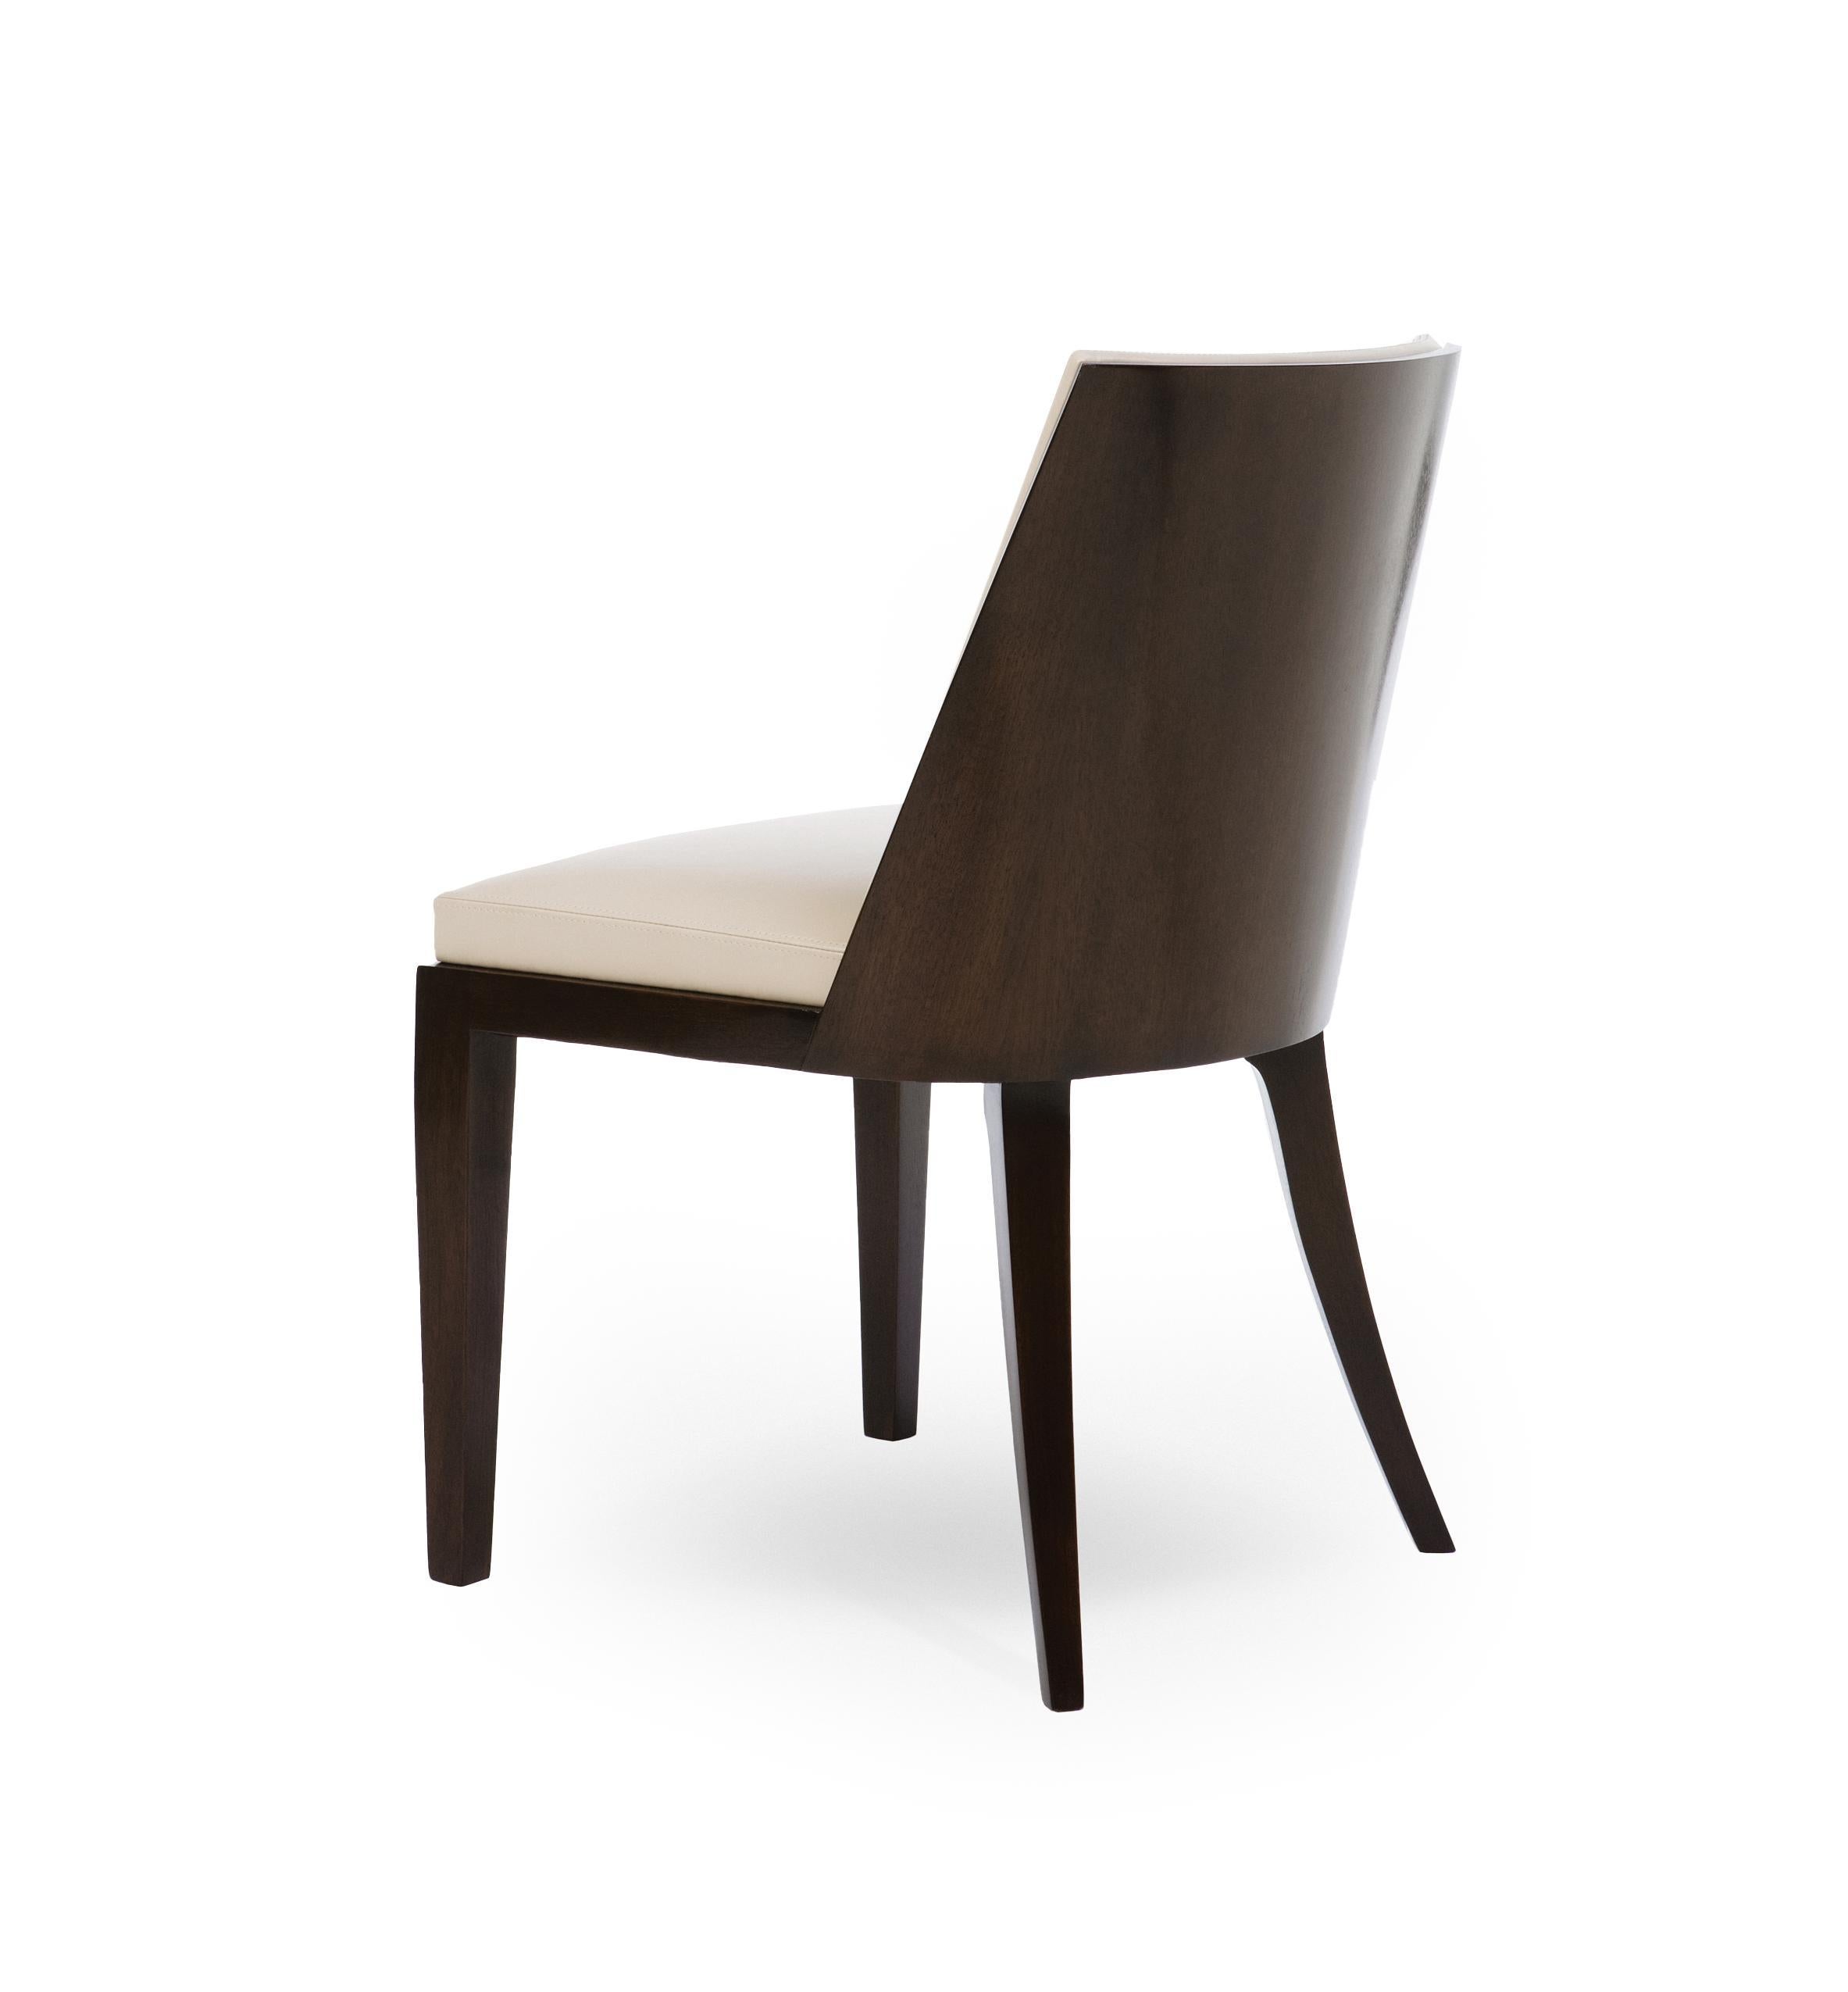 Holly Hunt Crescent dining chair in walnut cinder frame with upholstered seat

Additional Information:
Material: Walnut, upholstery
Frame: Walnut
Frame finish: Walnut Cinder
Seat & back finish: 9250/02 Milano Duomo leather
Dimensions: 20.75 W